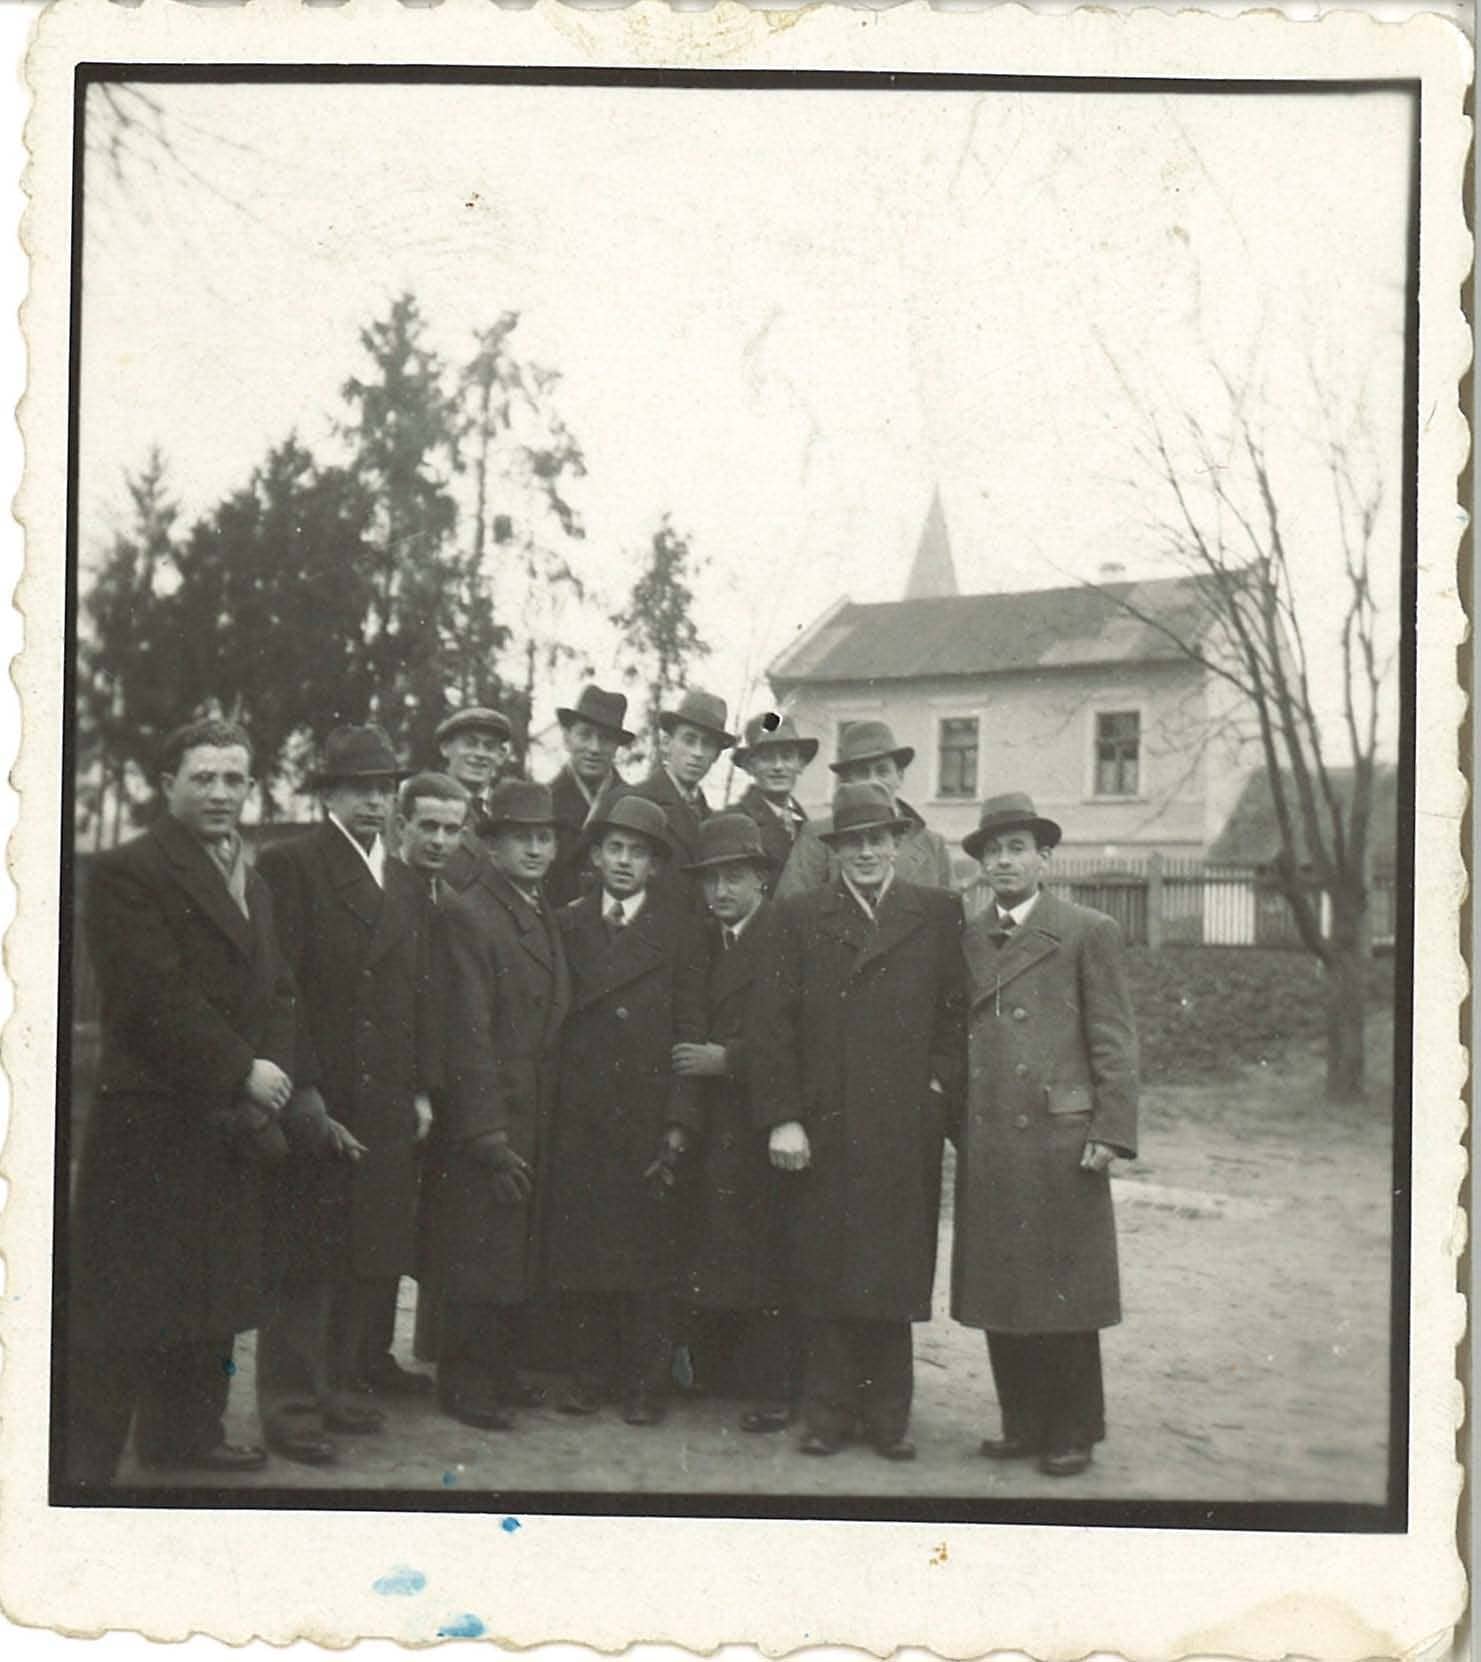 IDENTIFIED: 3rd person from the left is Yitchak Fudem (On back: 1934, Bardejov, Fudem)